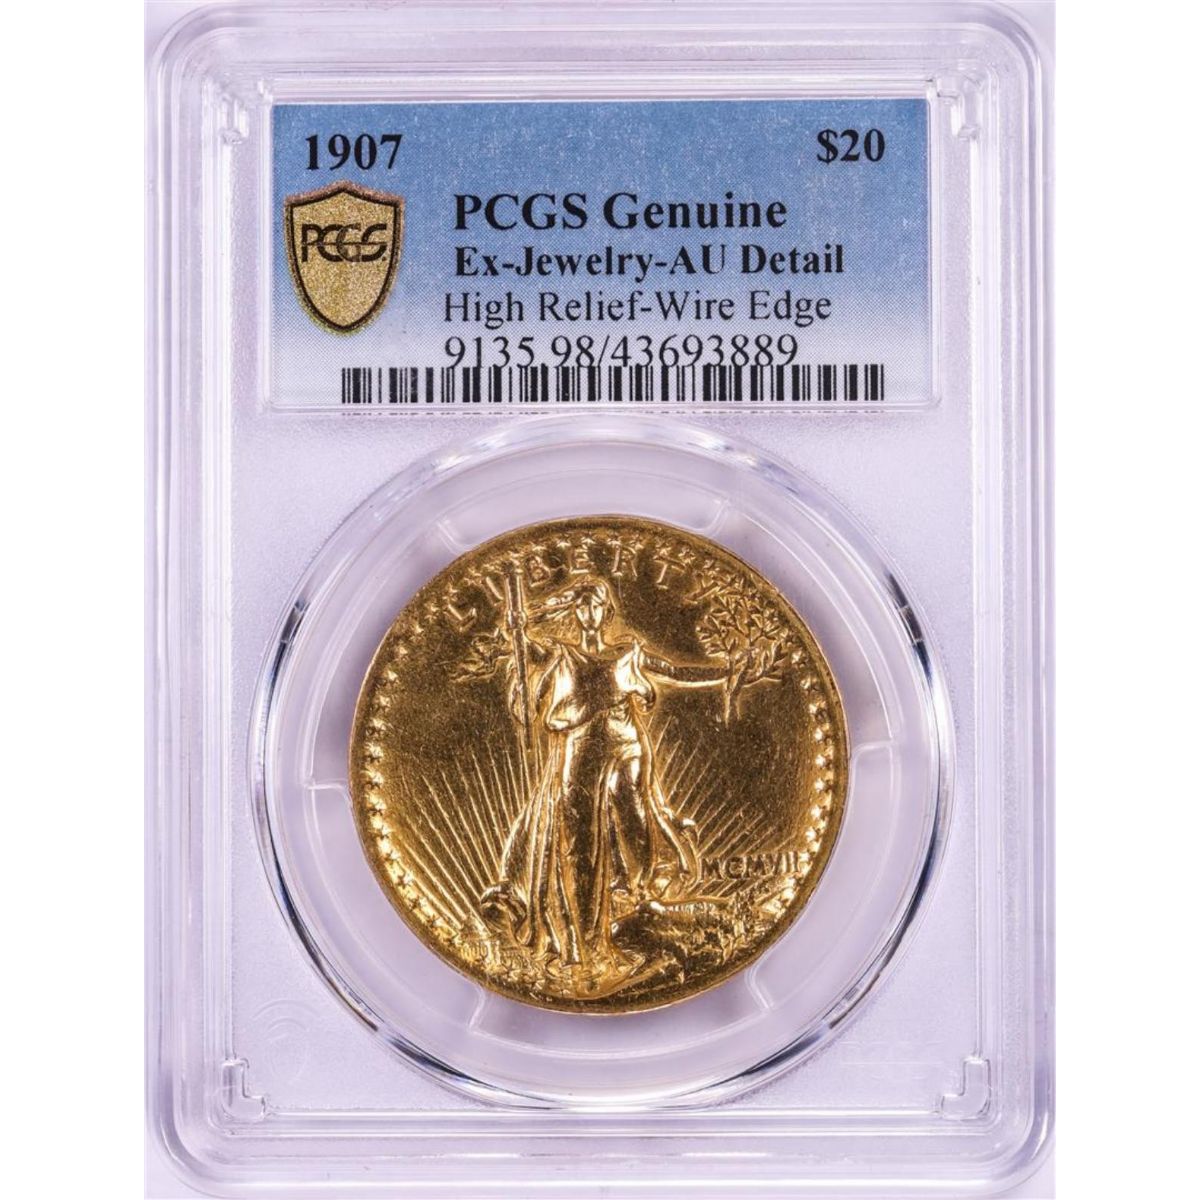 BK Auctions – Numismatic Event With Rare Coins!